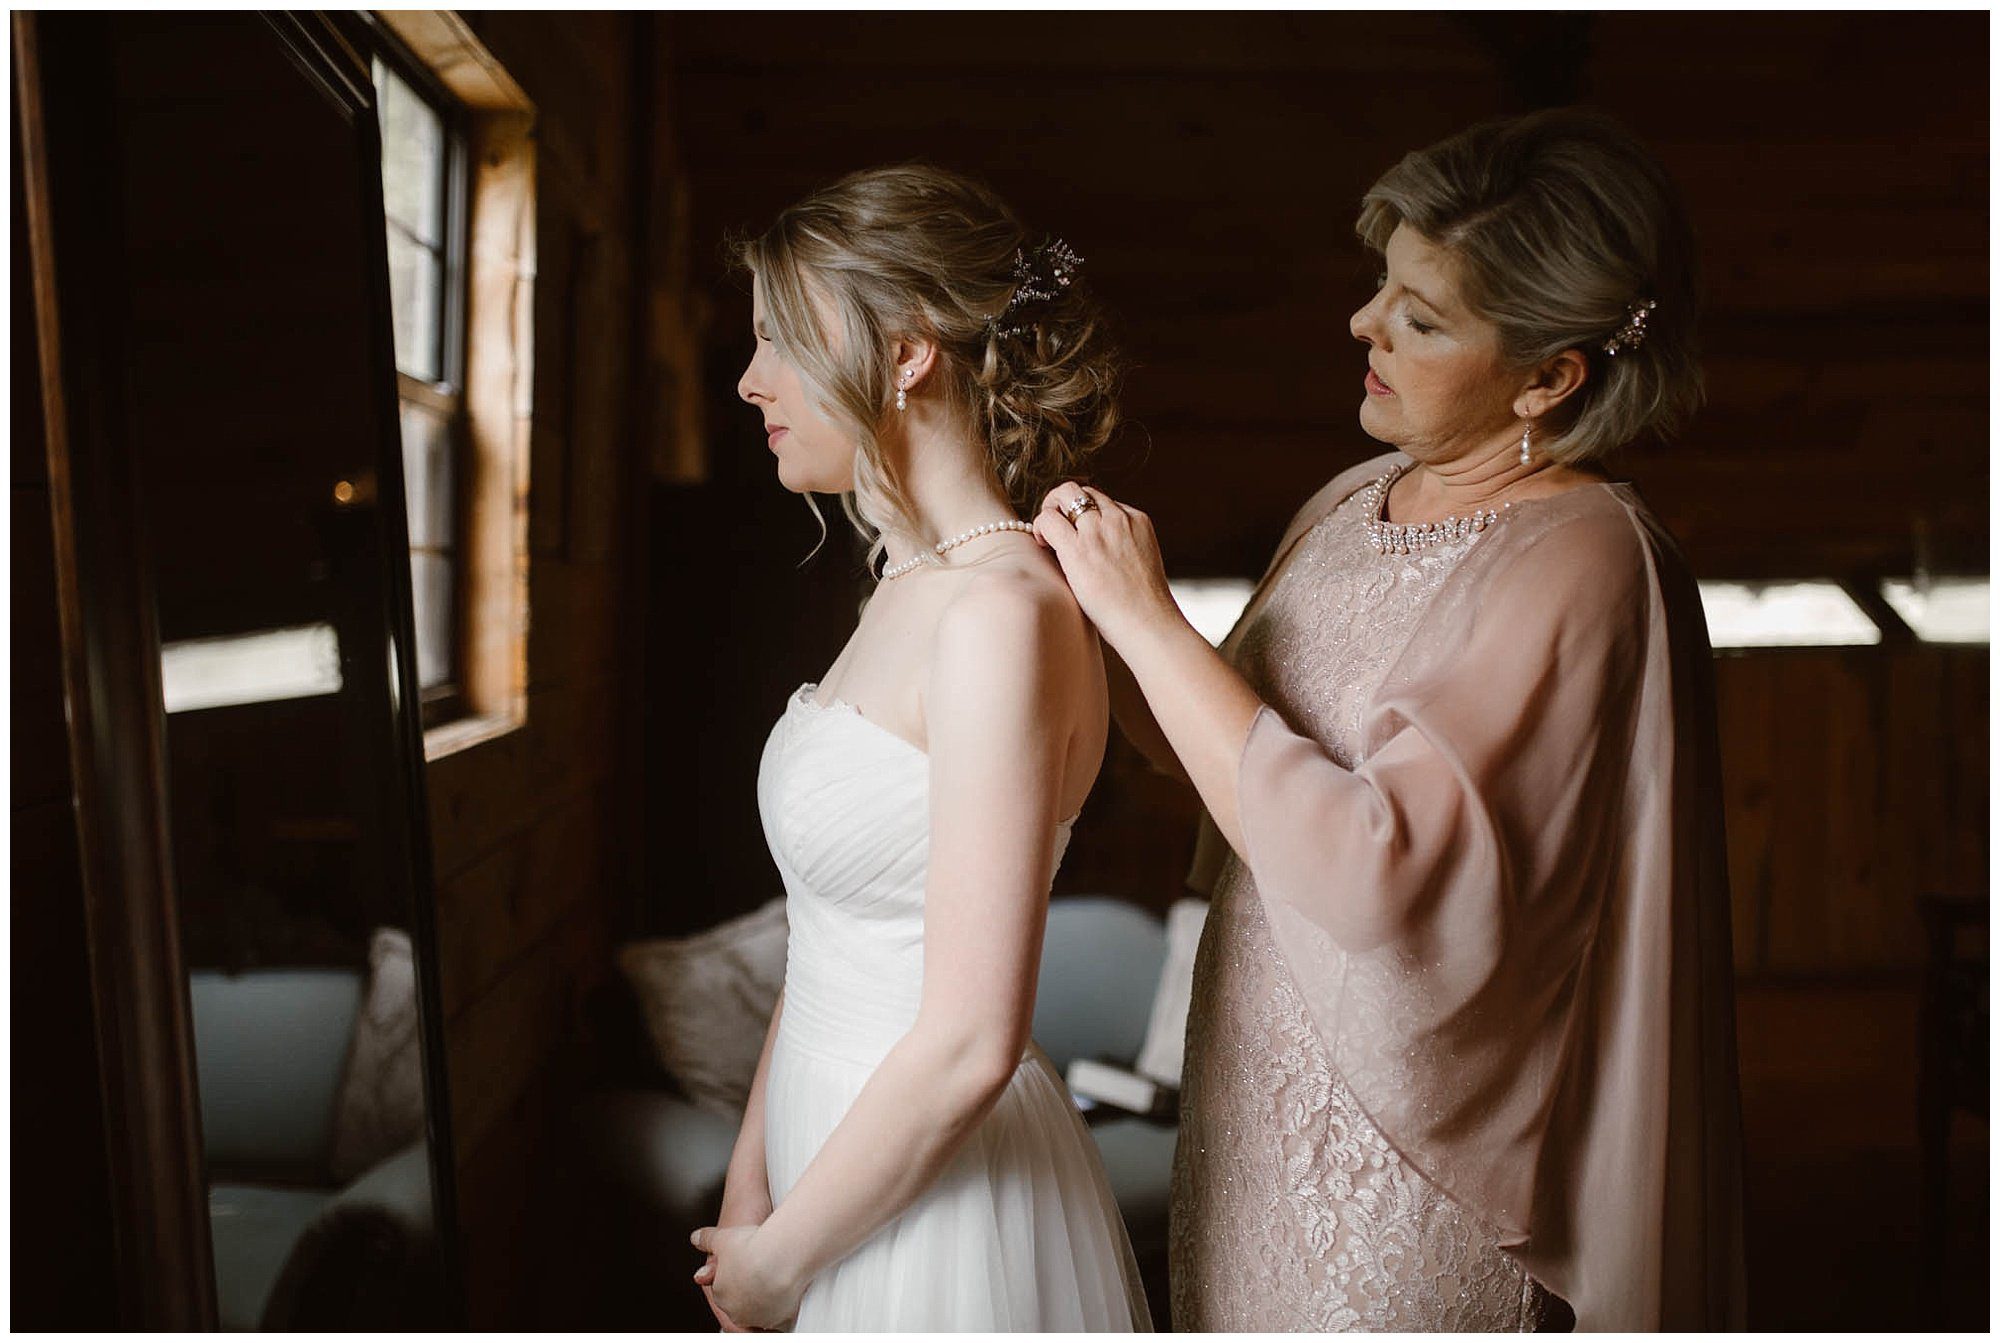 Mother of the bride helping bride get ready